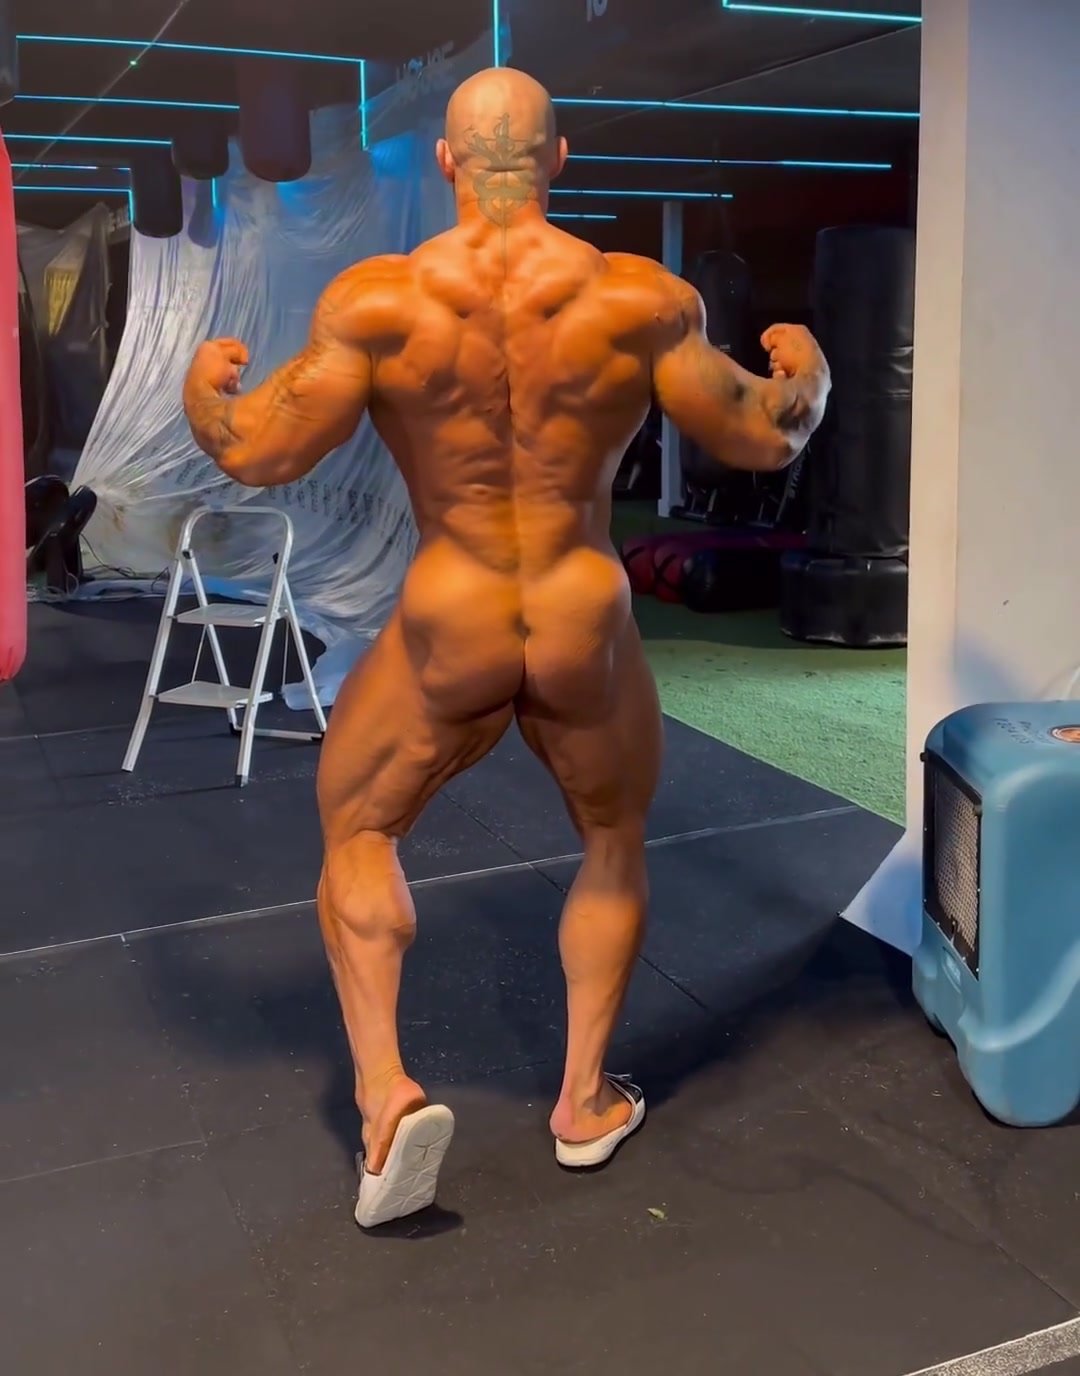 Bodybuilder butt clenched